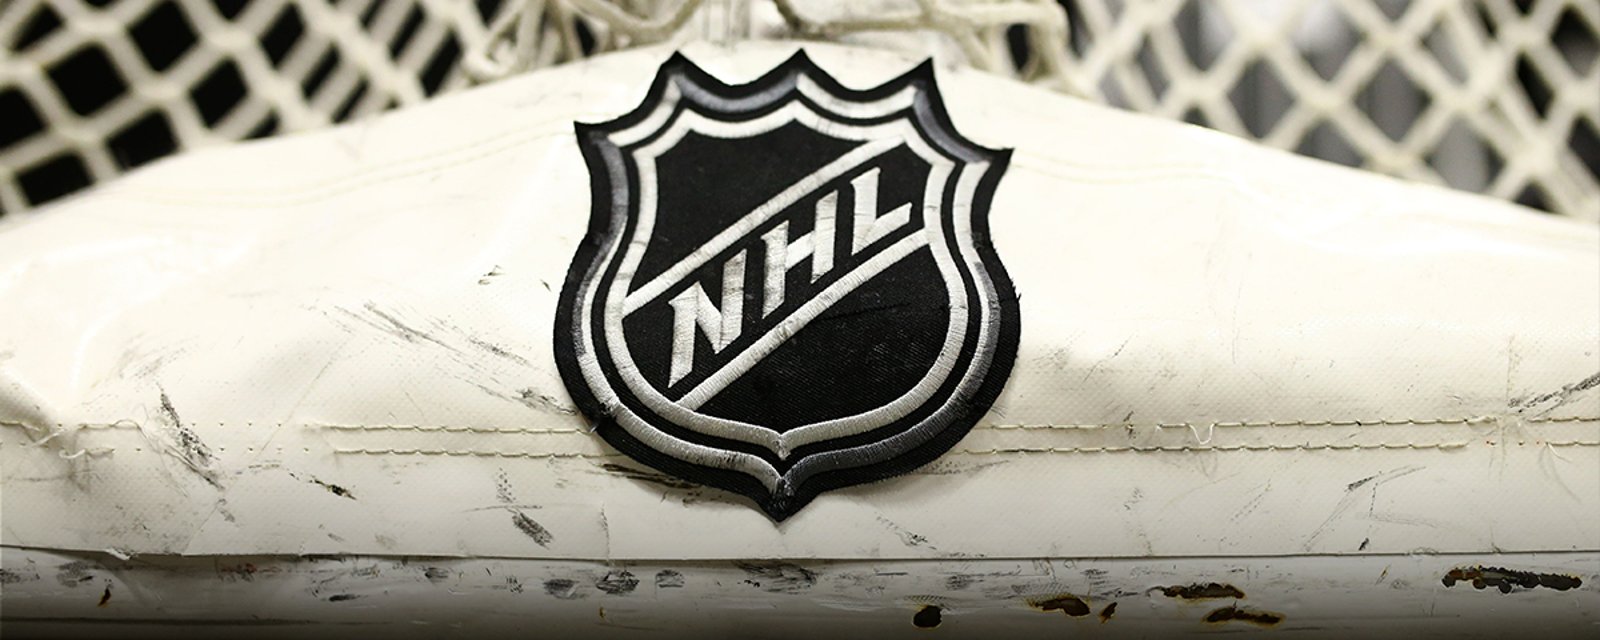 Must See: NHL team named as #1 franchise in all of sports